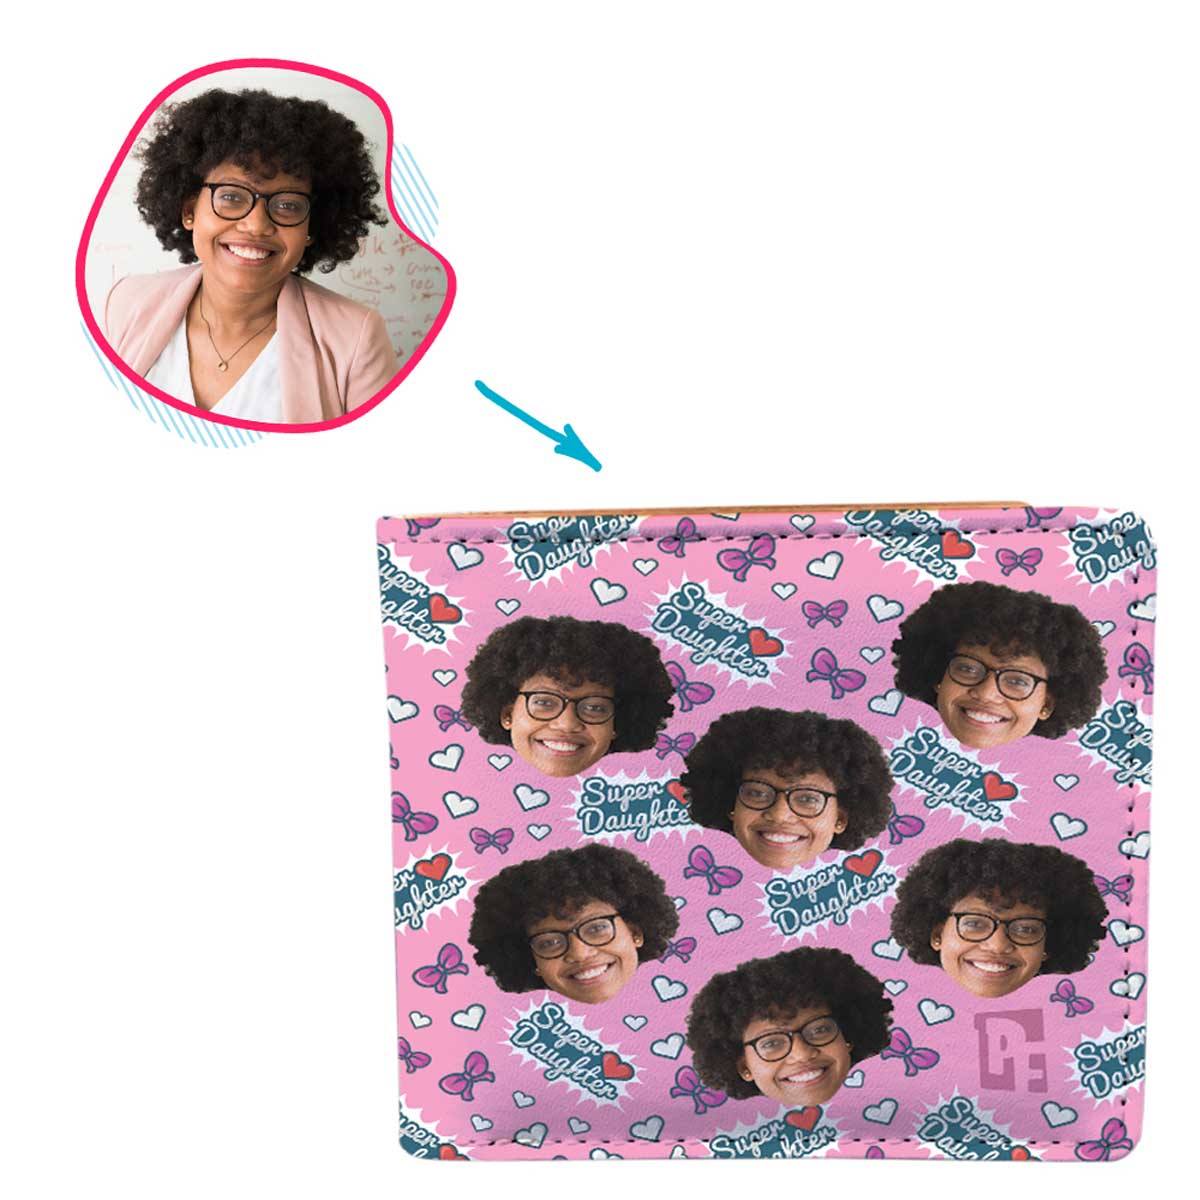 pink Super Daughter wallet personalized with photo of face printed on it